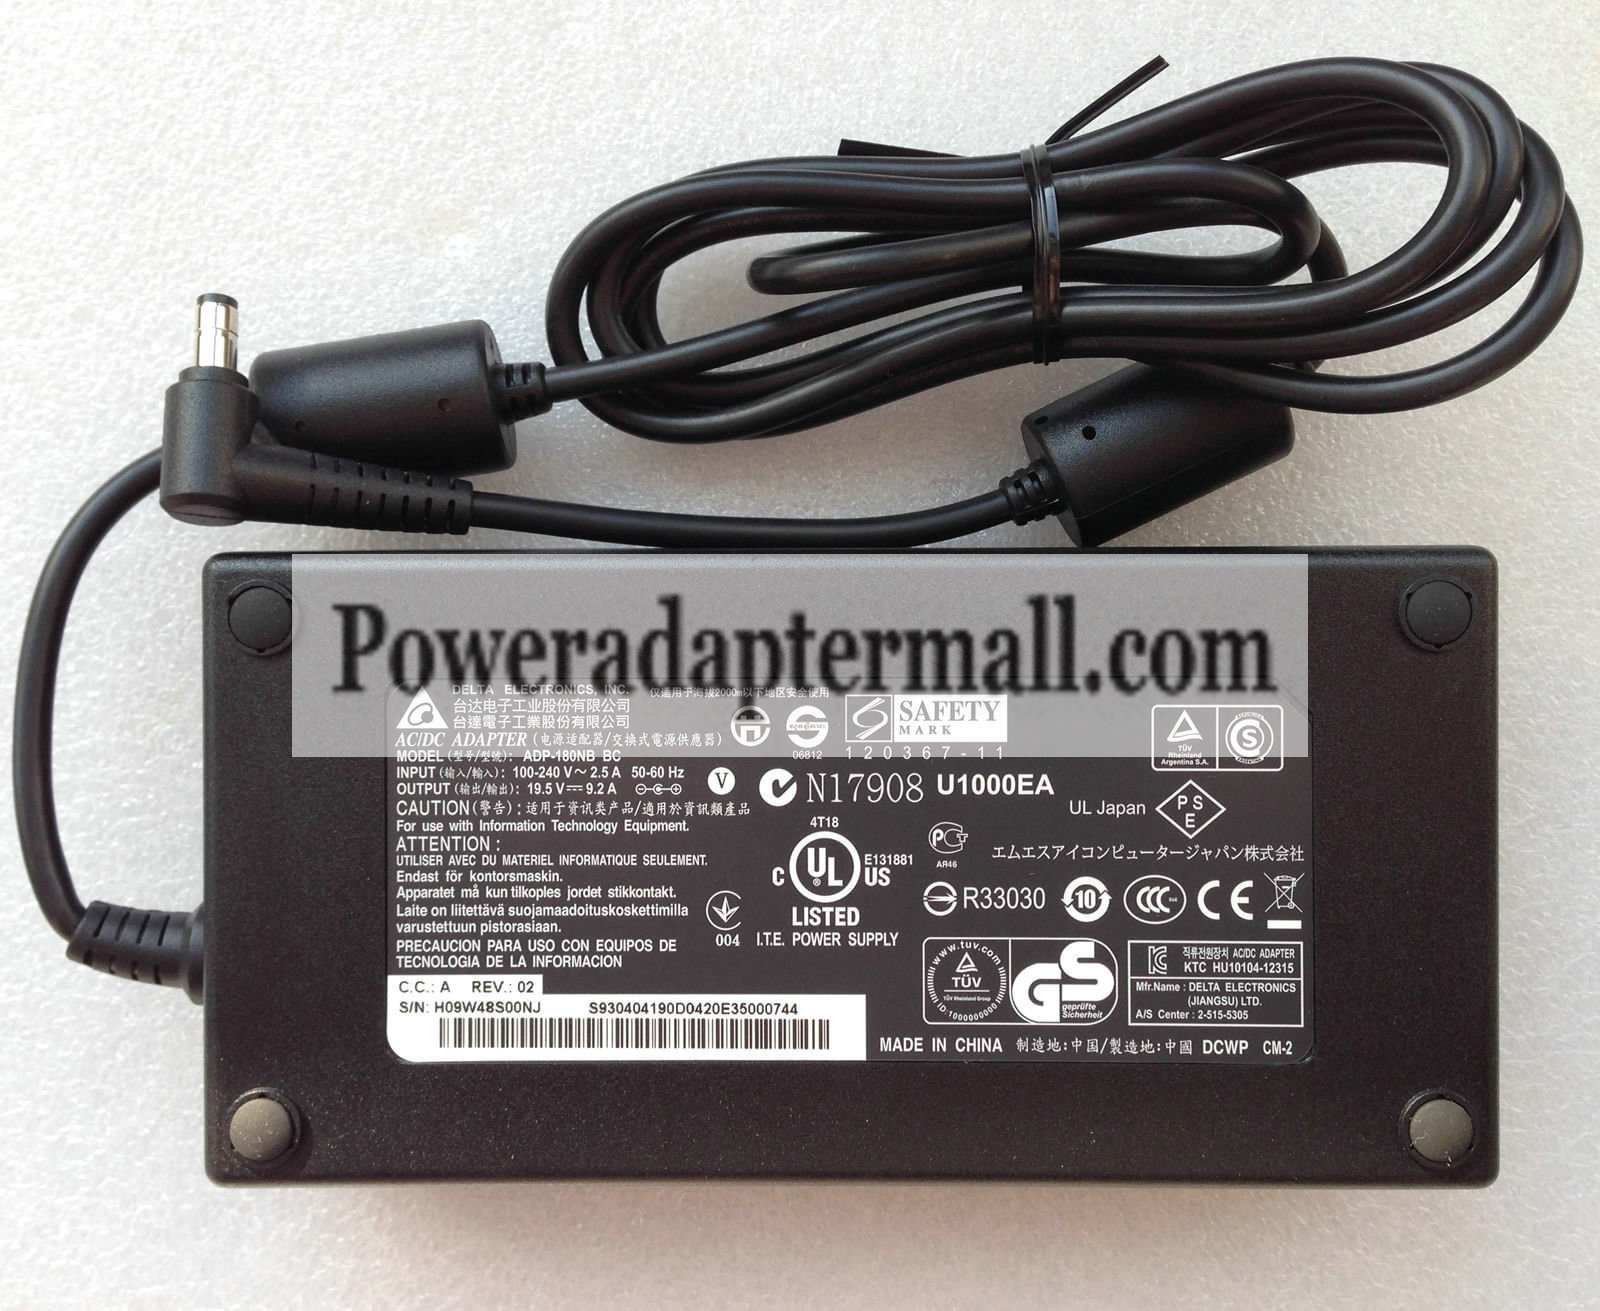 19.5V 9.2A Clevo P150HM Gaming Notebook AC Adapter power supply